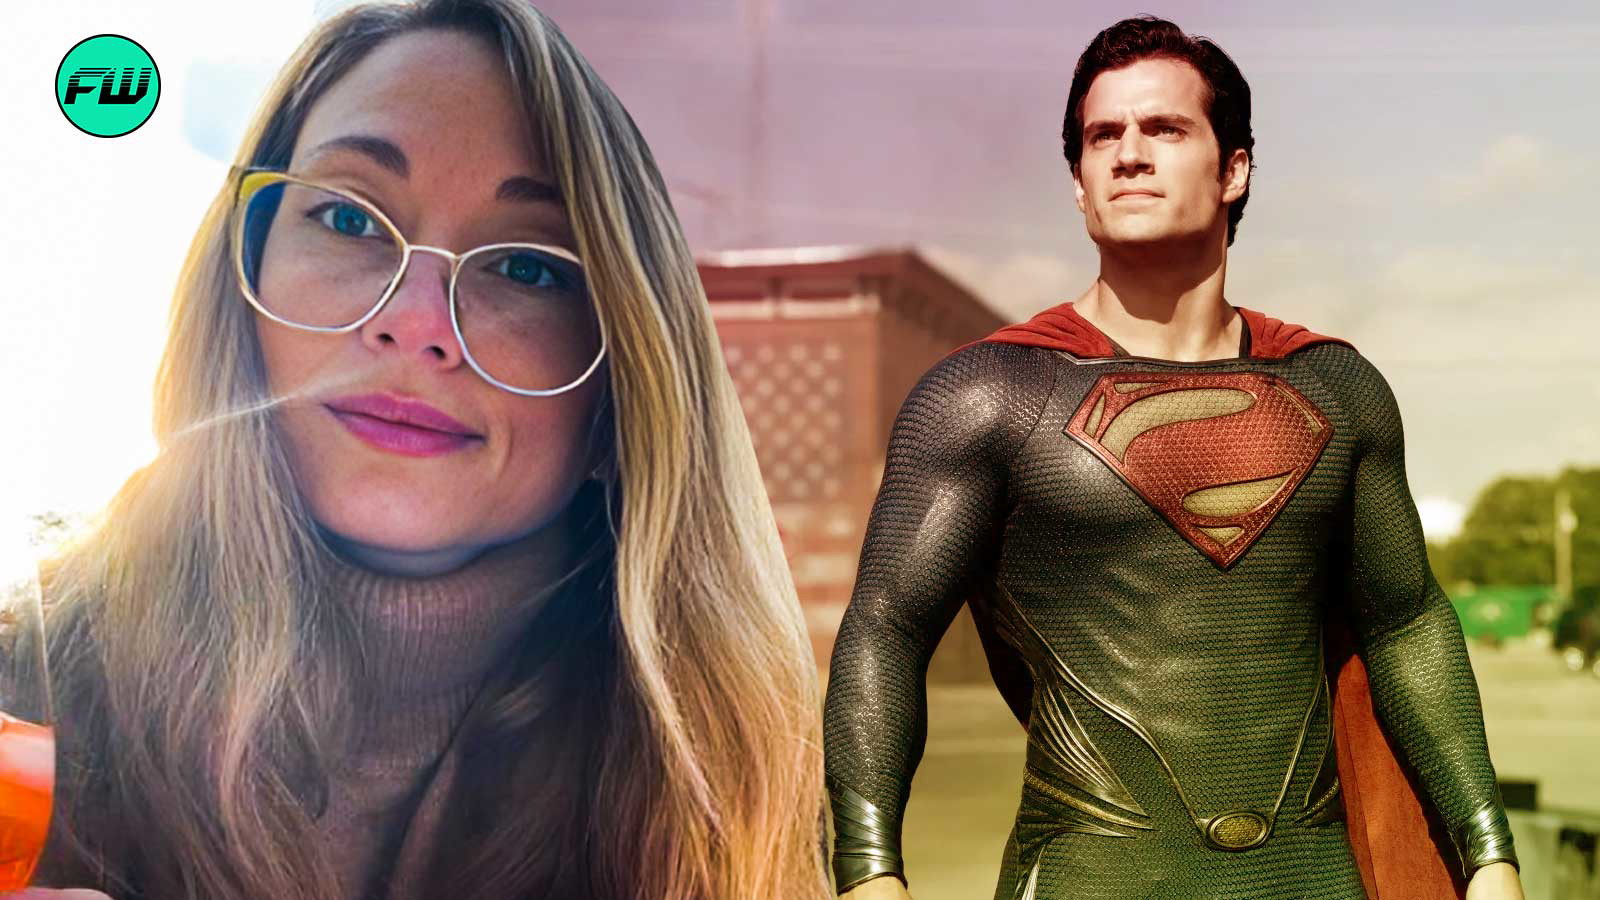 Even the Man of Steel himself, Henry Cavill, is “super slow” to propose to Natalie Viscuso